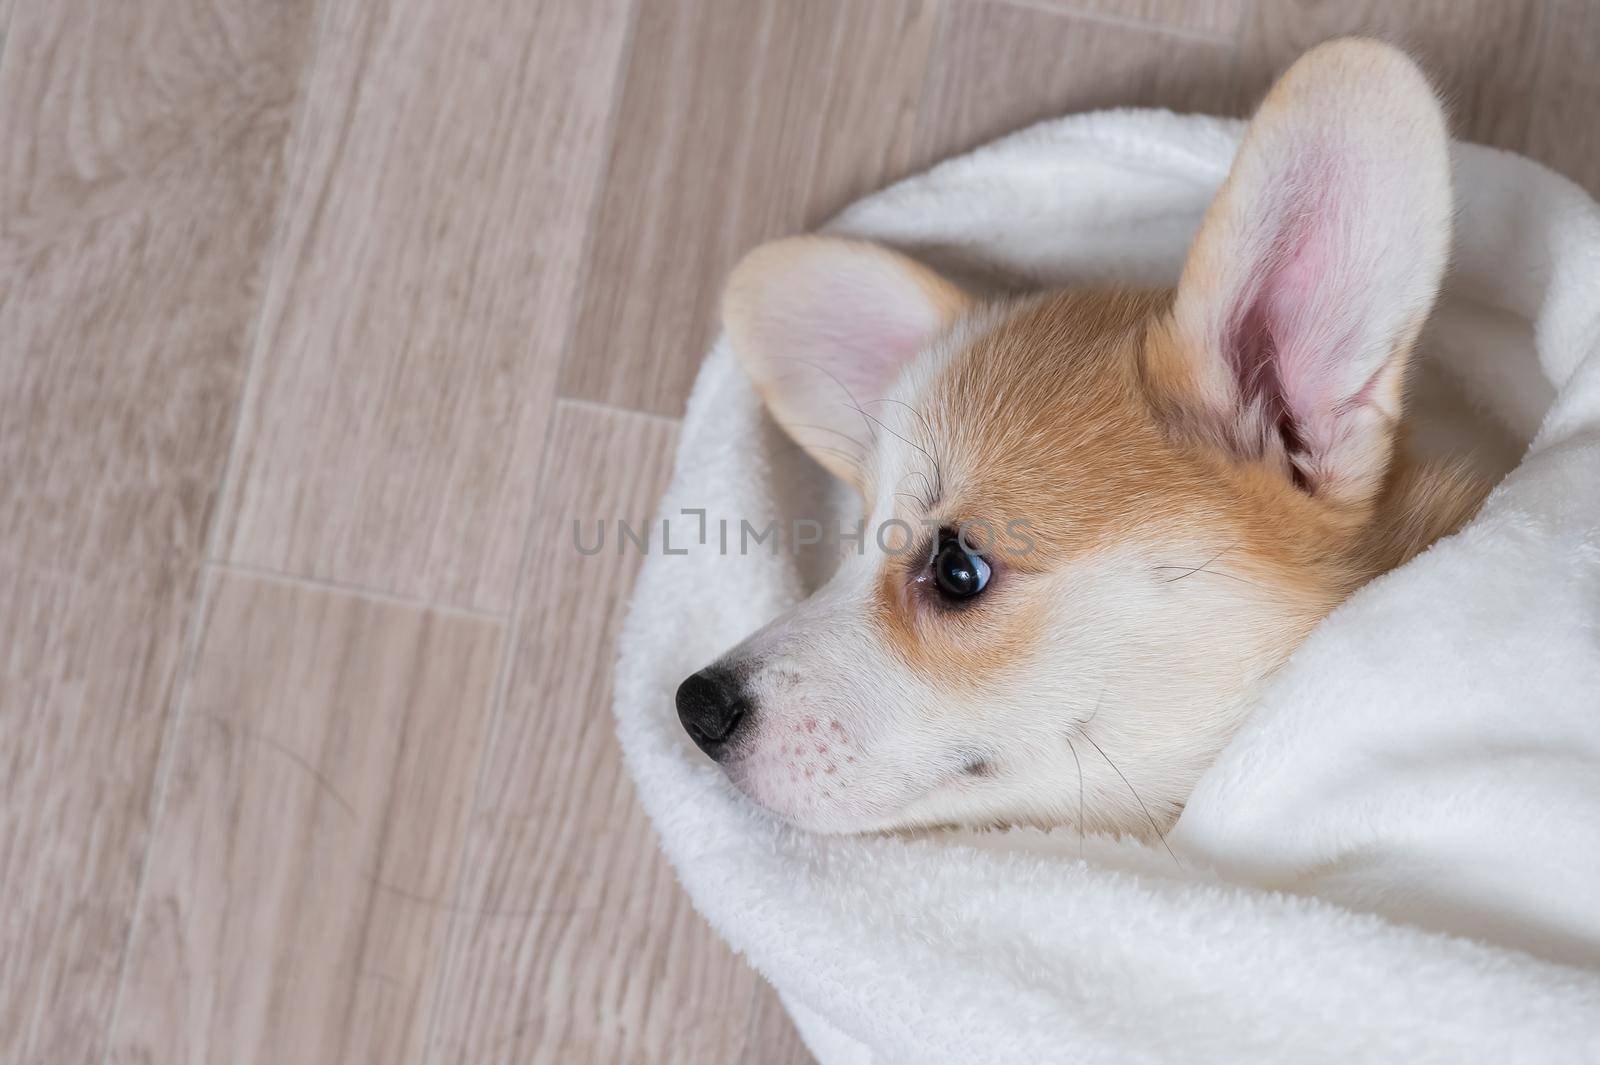 Woman wrapped a red corgi puppy in a blanket